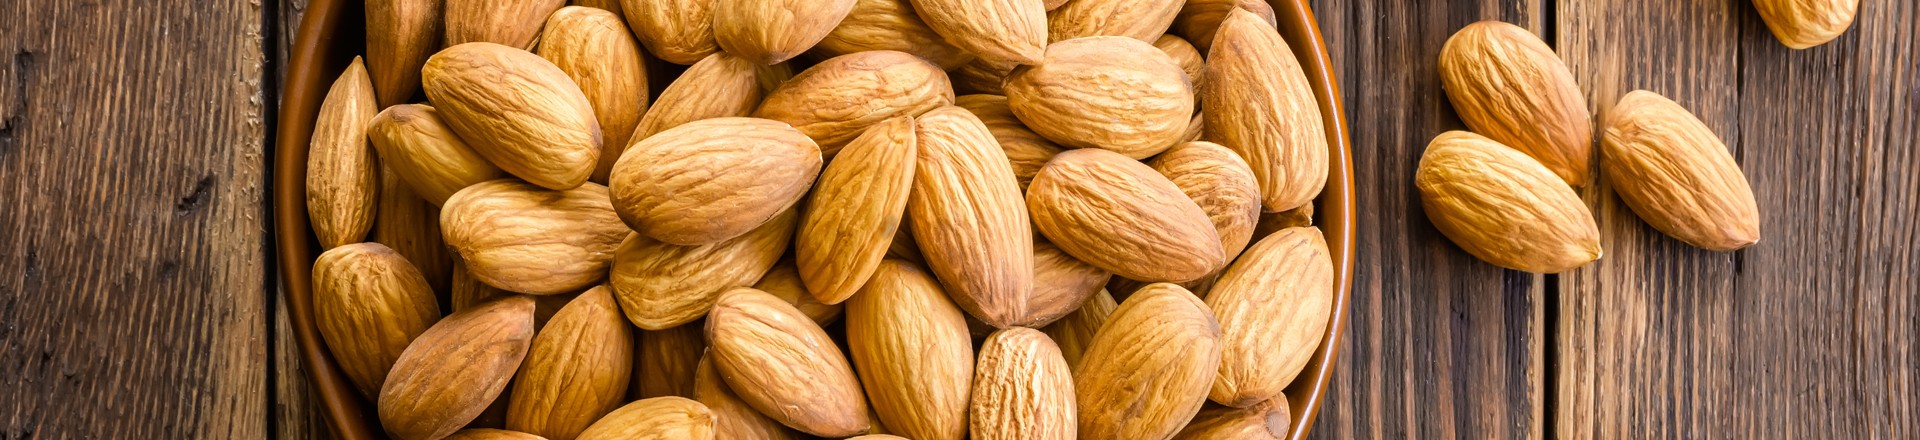 almonds for healthy HDL cholesterol